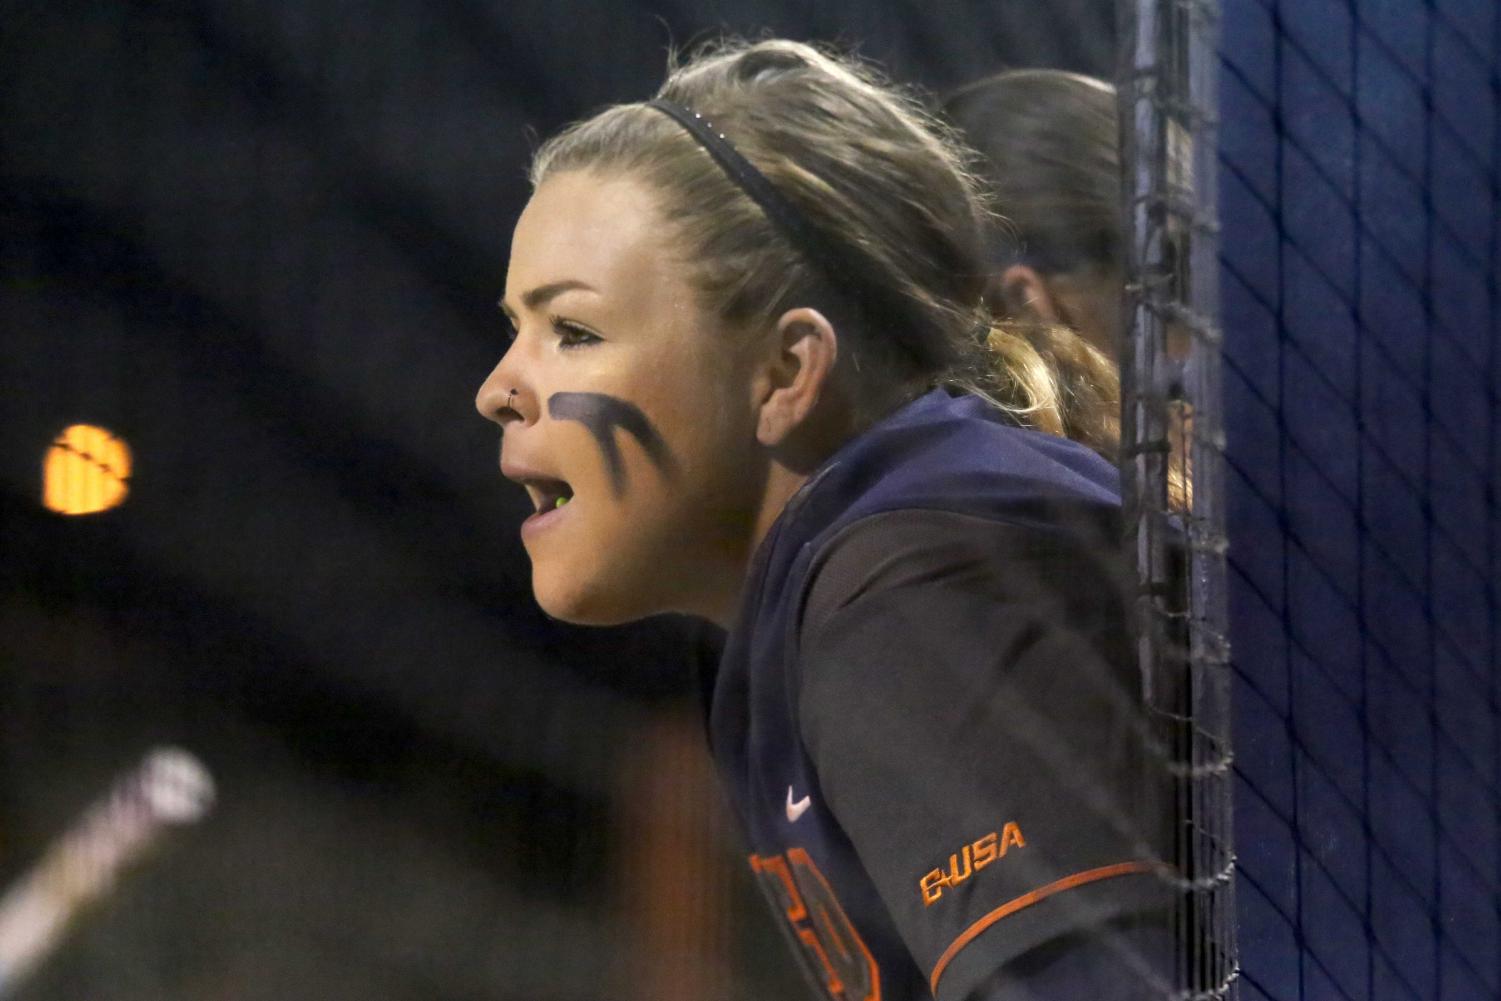 Softball+grabs+two+wins+in+day+one+of+UTEP+Tournament